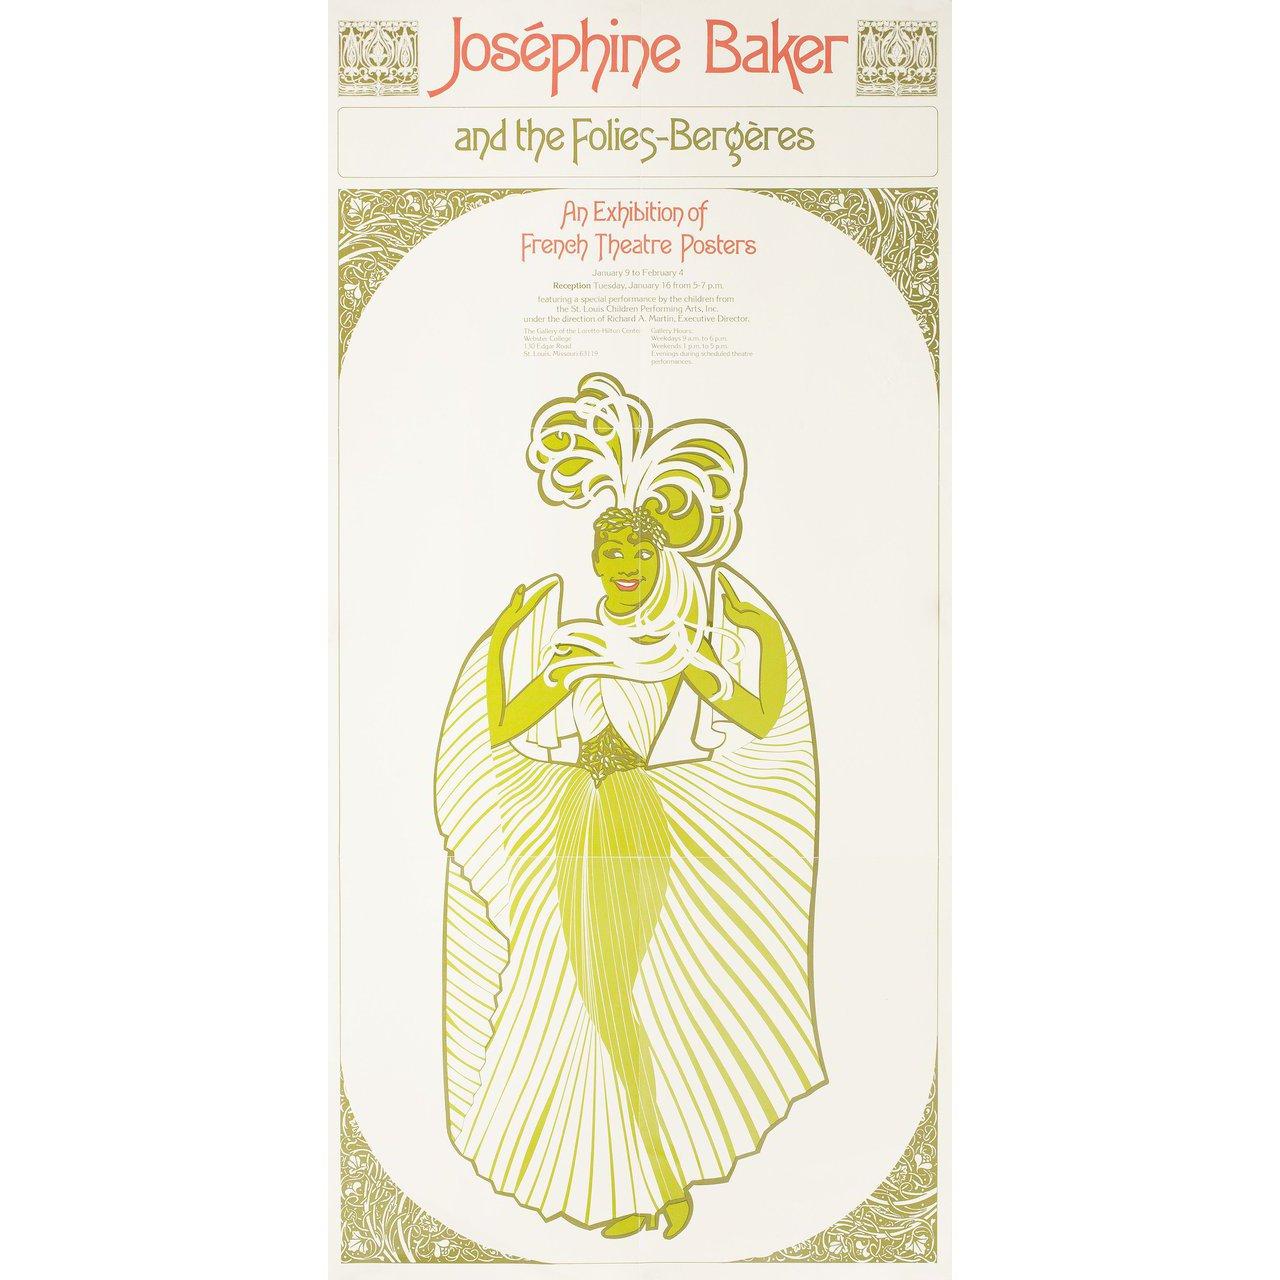 Original 1970s U.S. poster for the exhibition “Josephine Baker and the Folies Bergères”. Very good-fine condition, folded. Many original posters were issued folded or were subsequently folded. Please note: the size is stated in inches and the actual